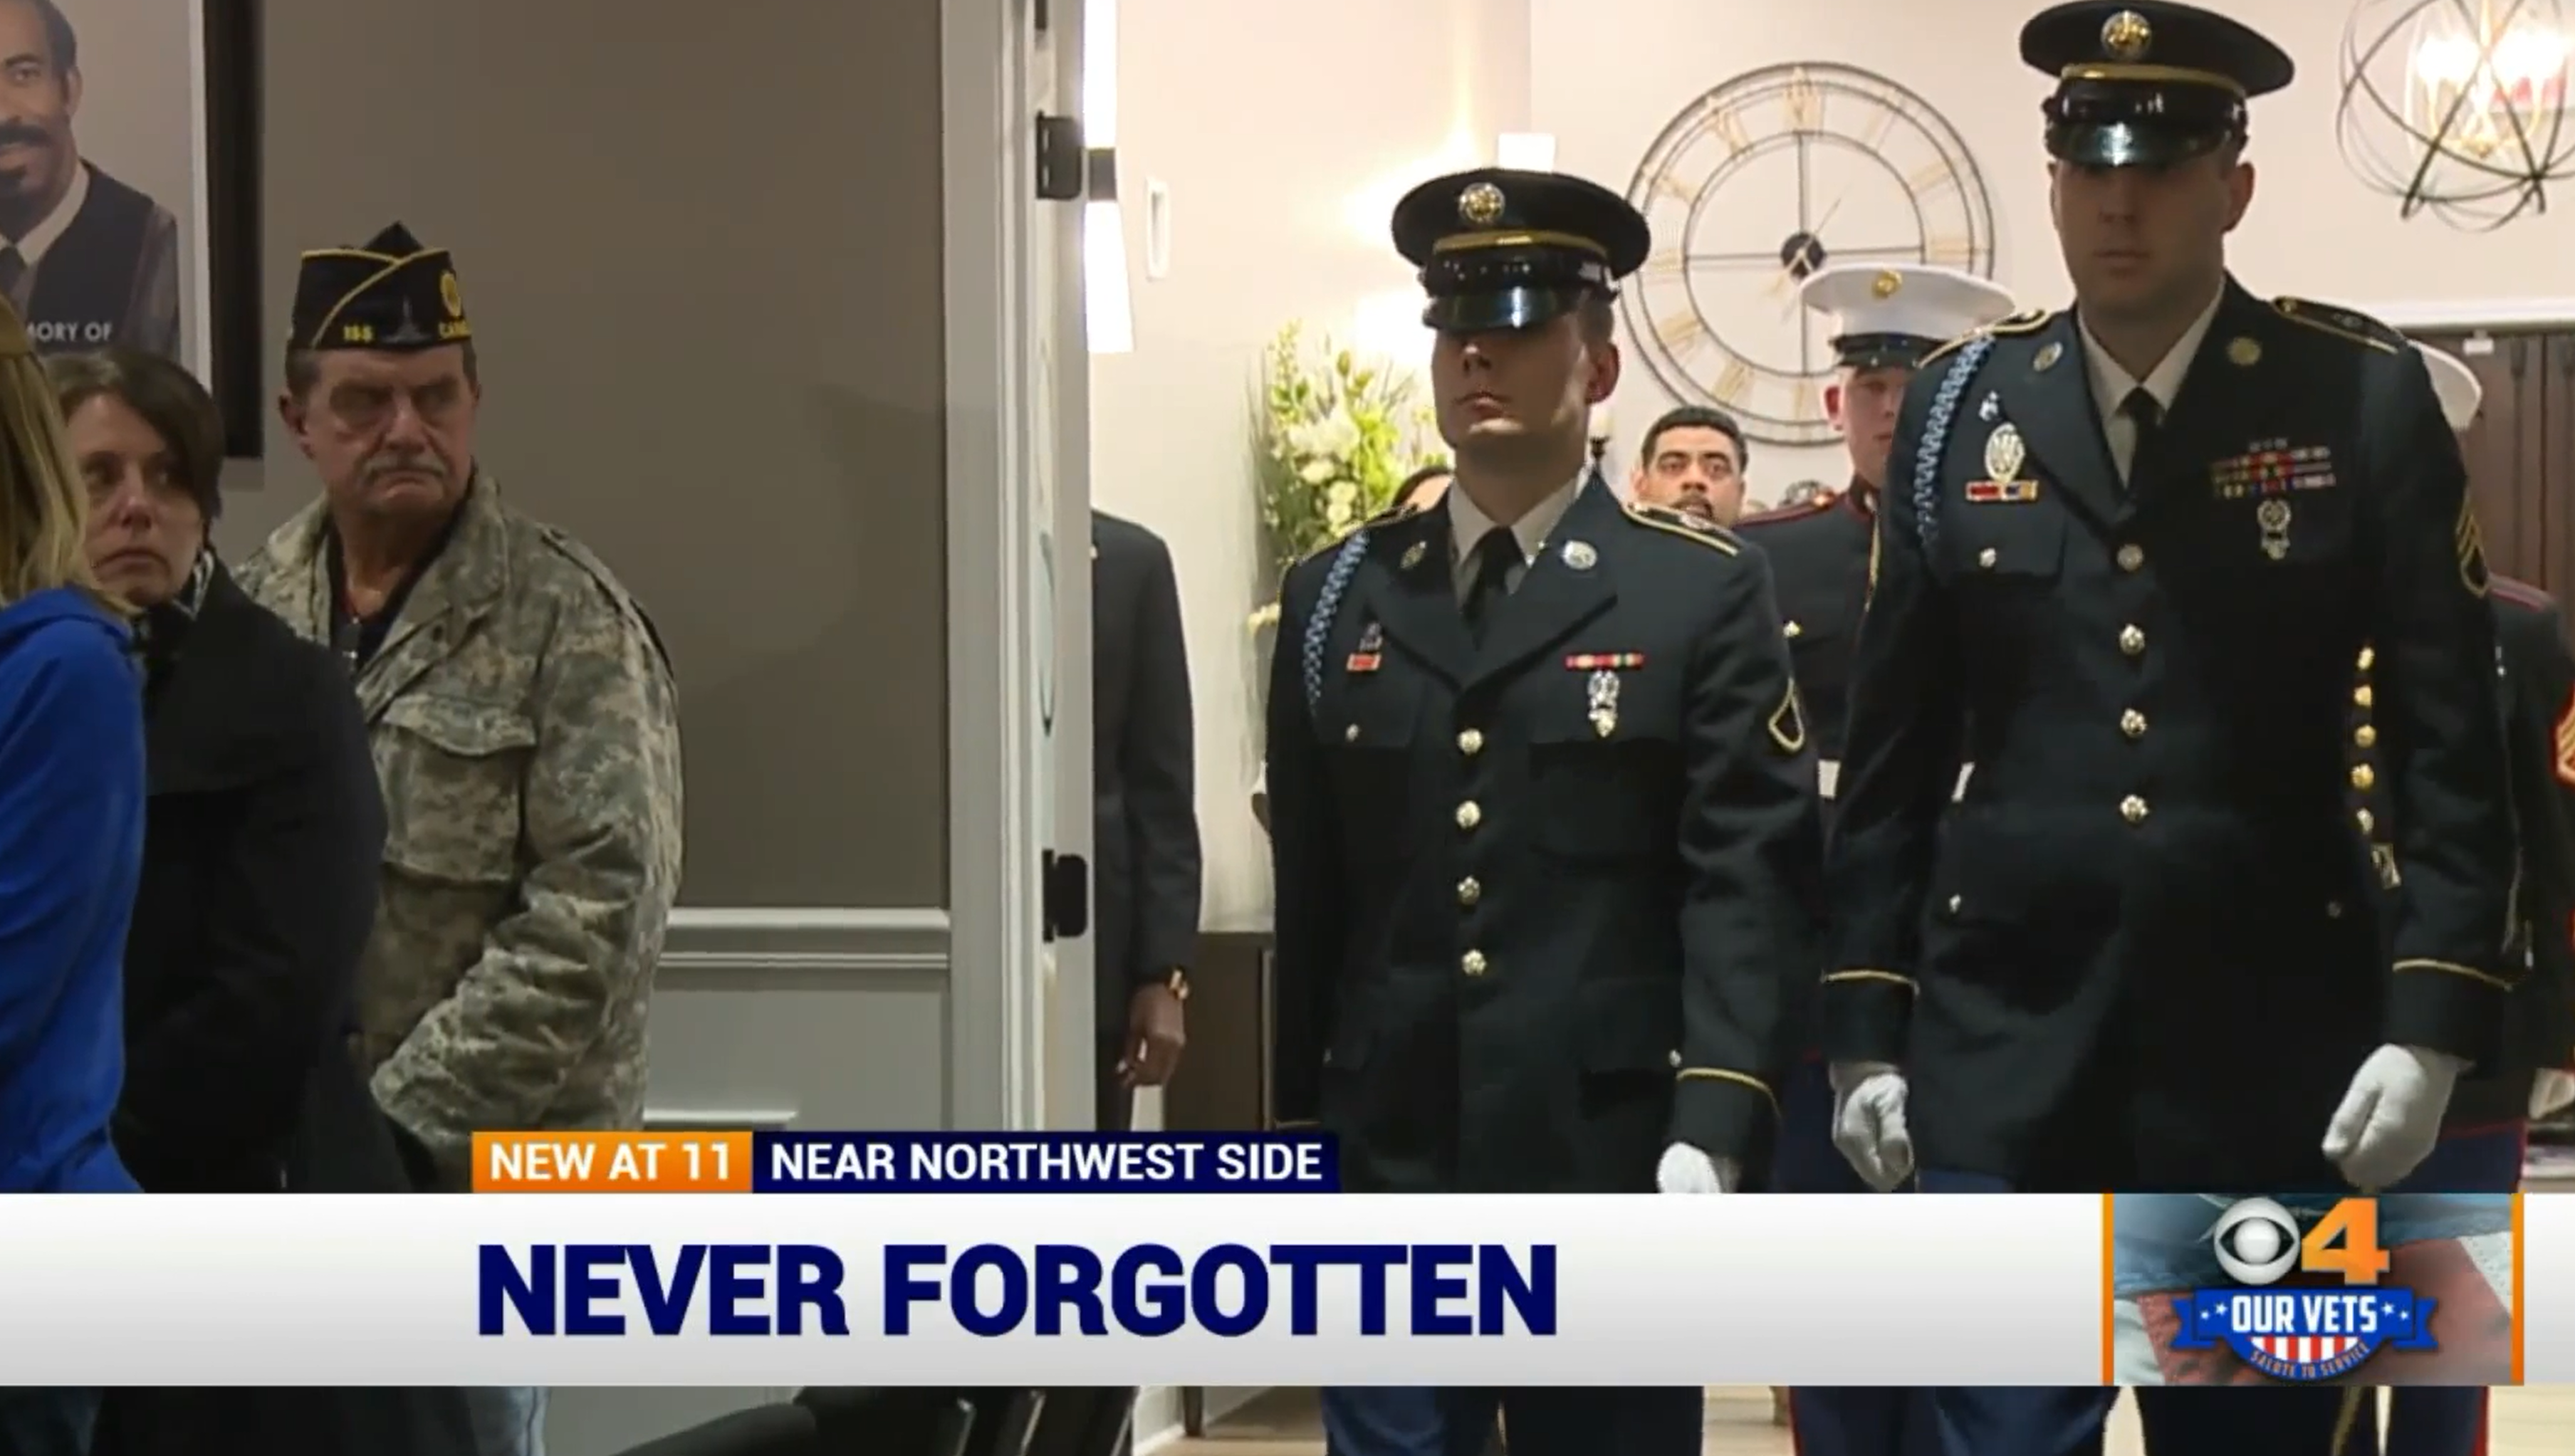 ‘Standing Room Only’ during memorial honoring two ‘unclaimed’ veterans